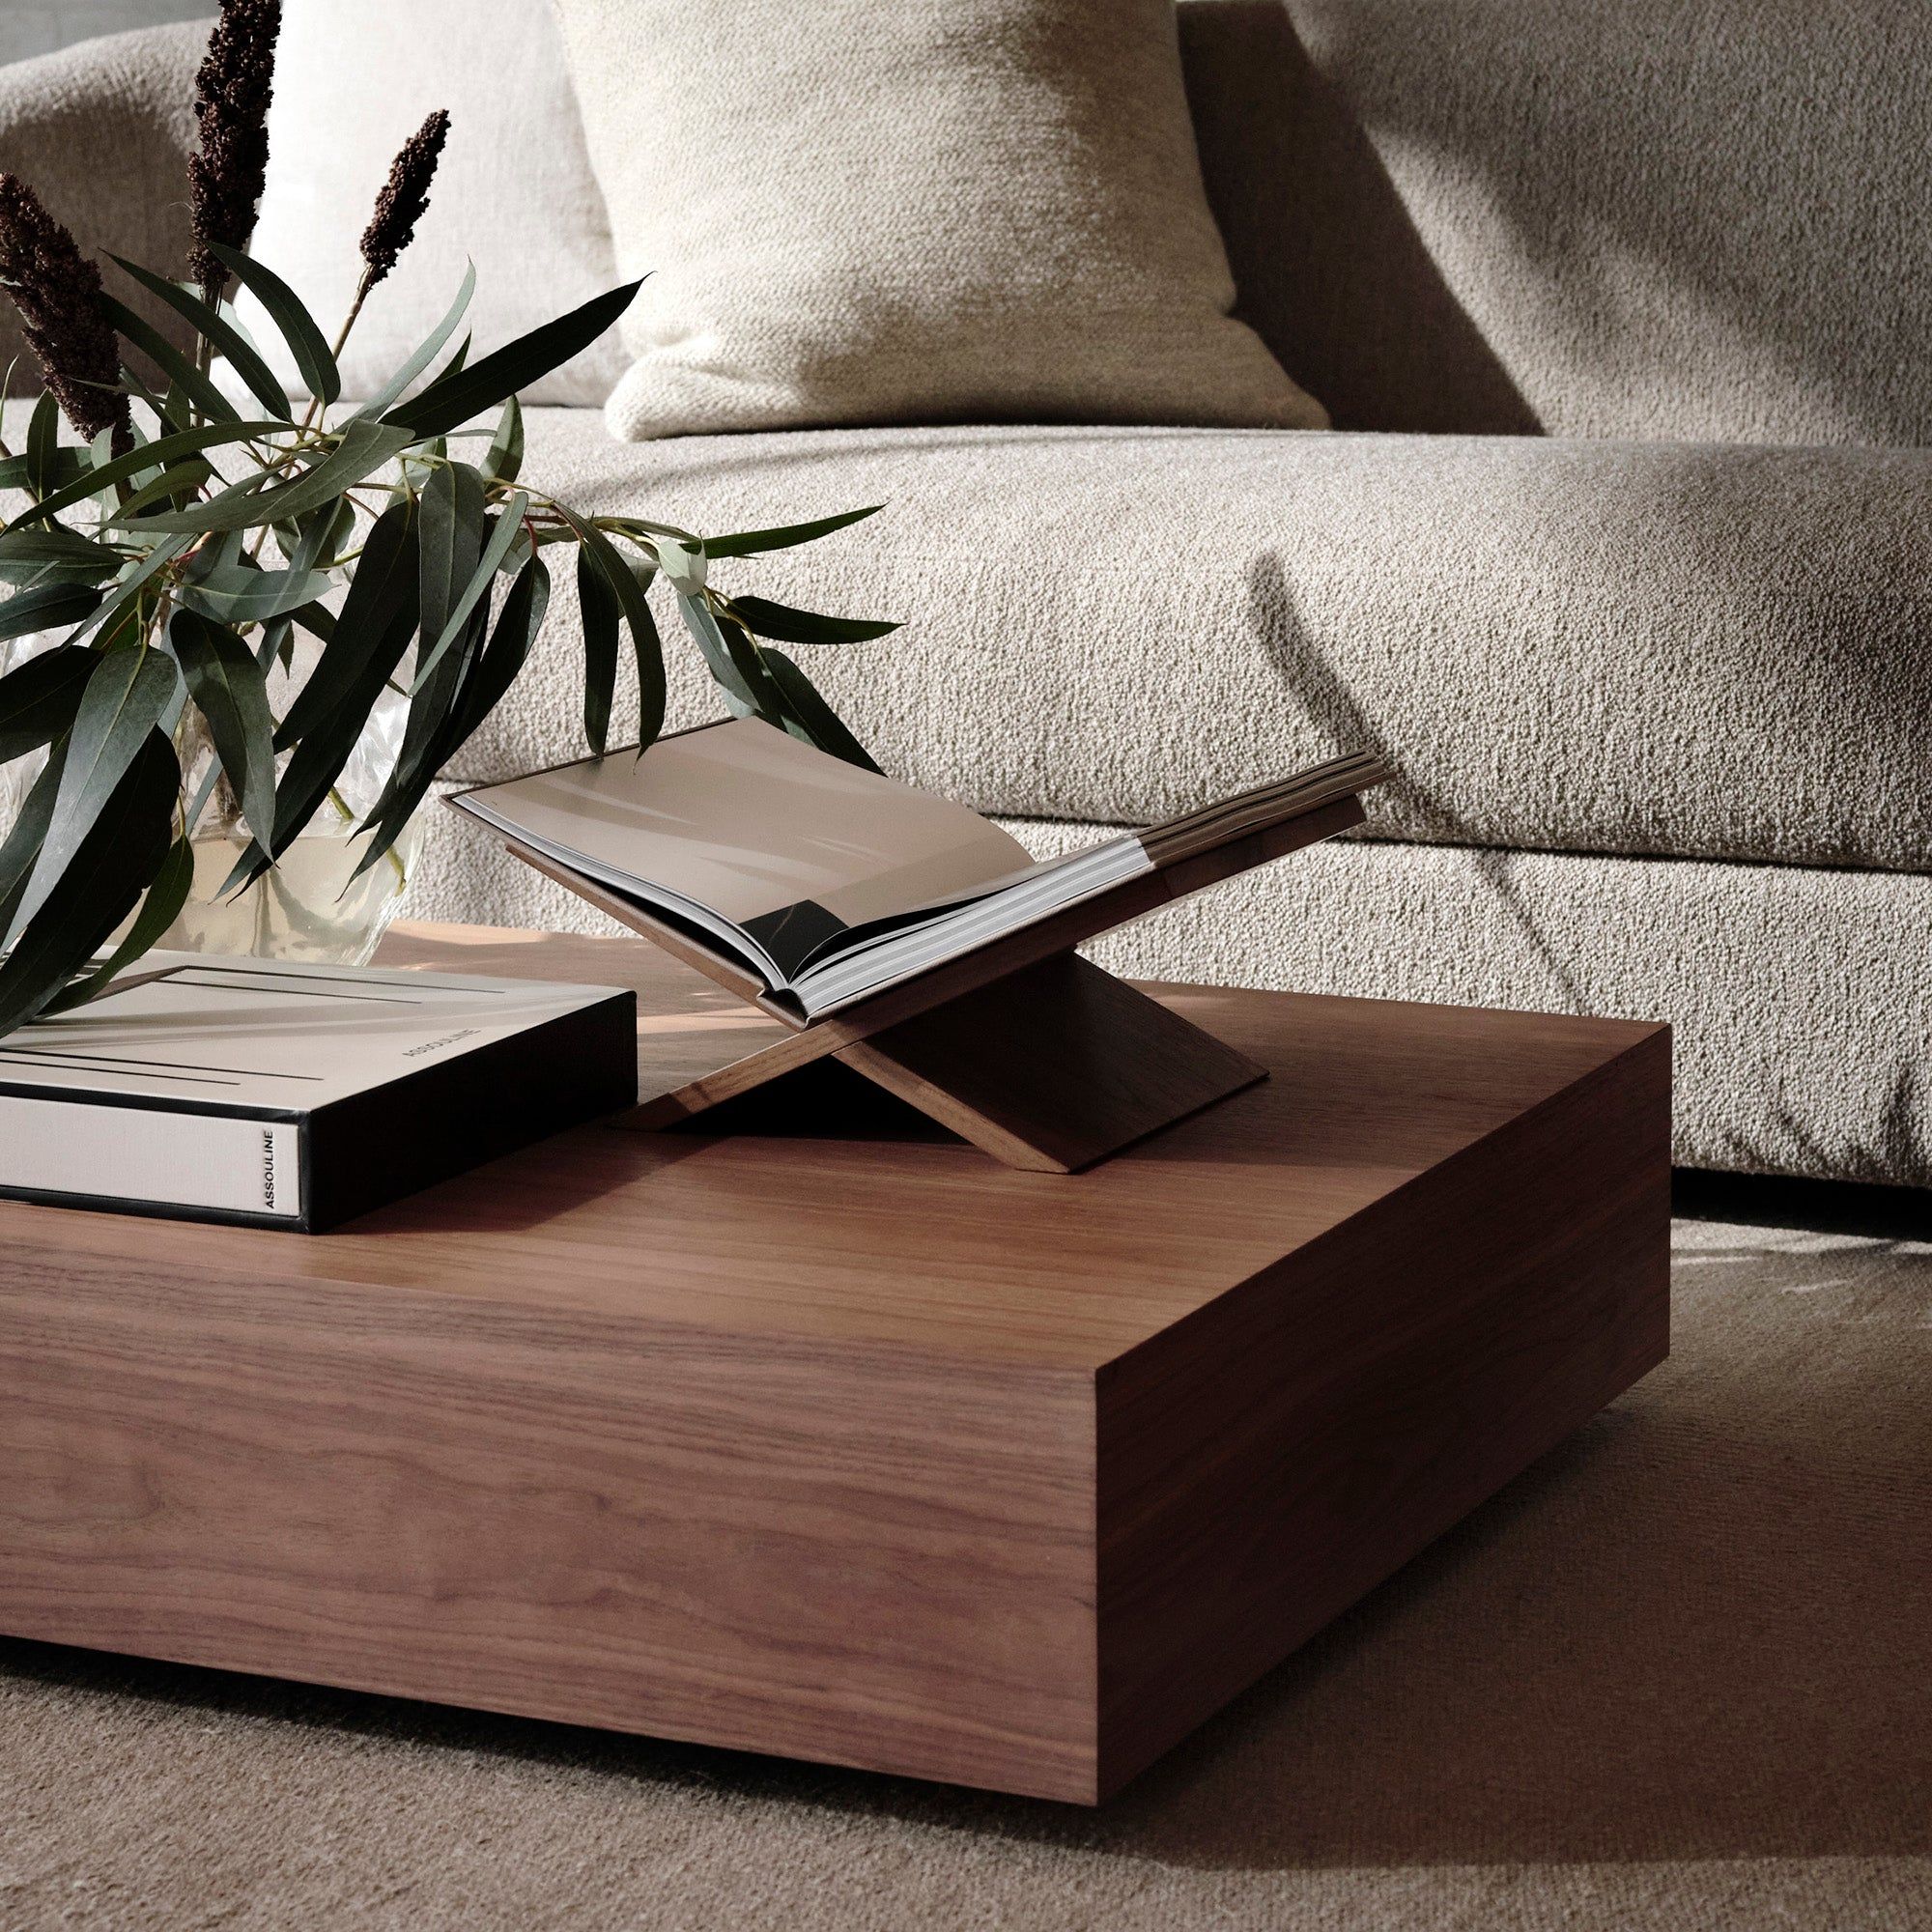 Transform Your Living Room with Modular
Coffee Tables